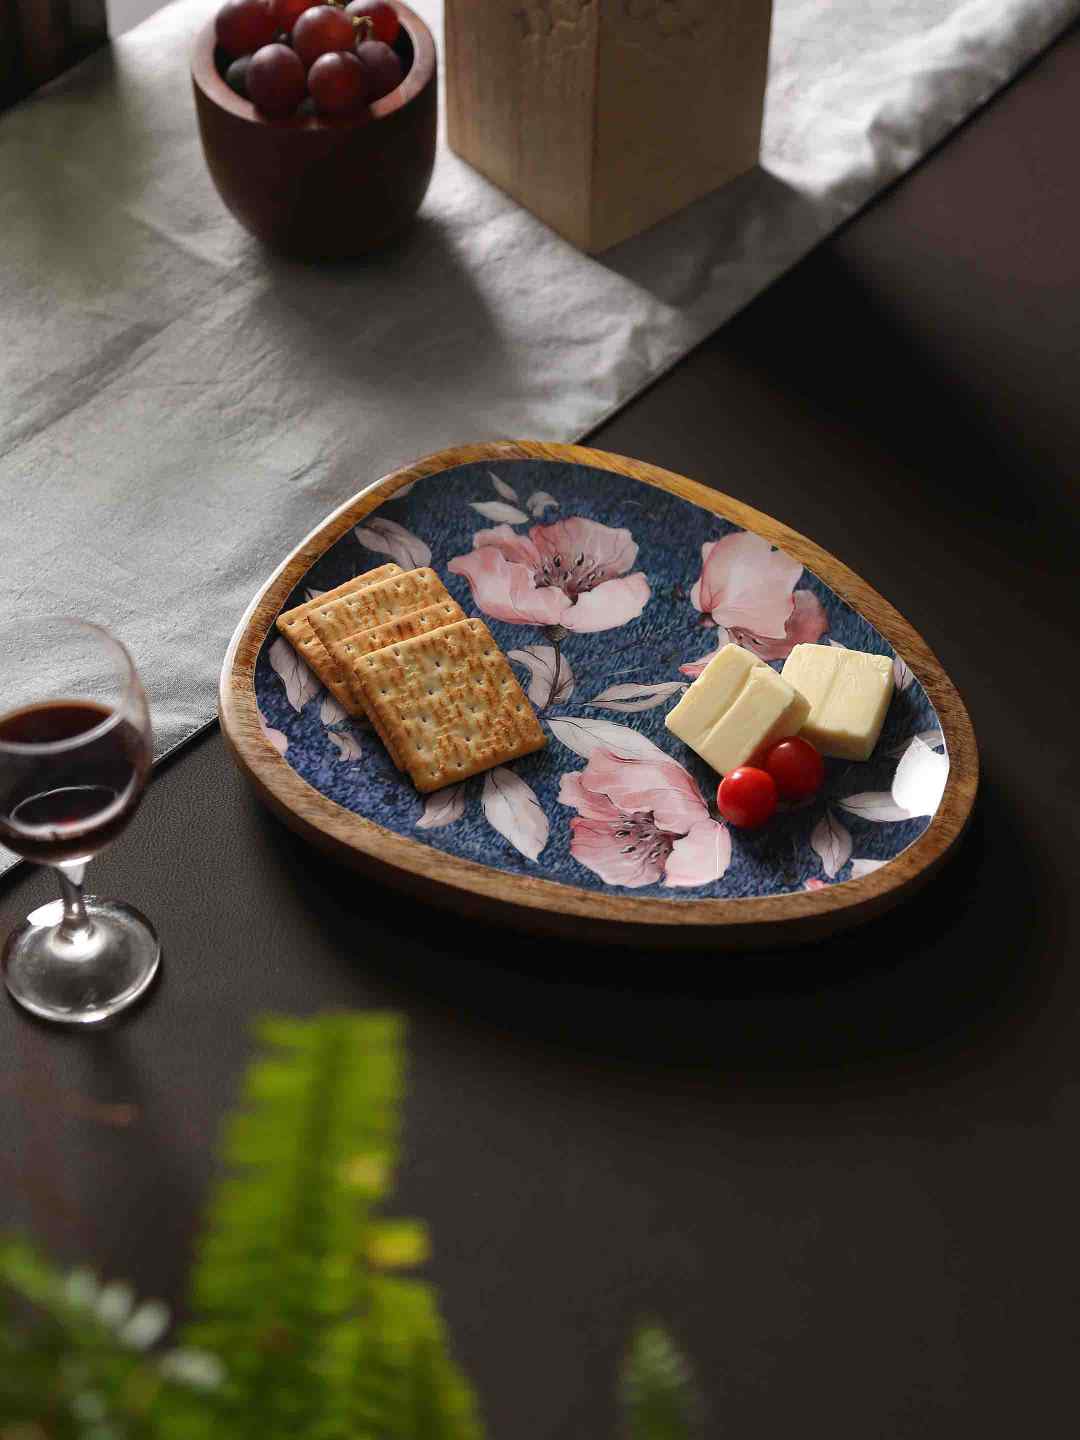 Blue Wooden Platter With Flower Design – Amoliconcepts